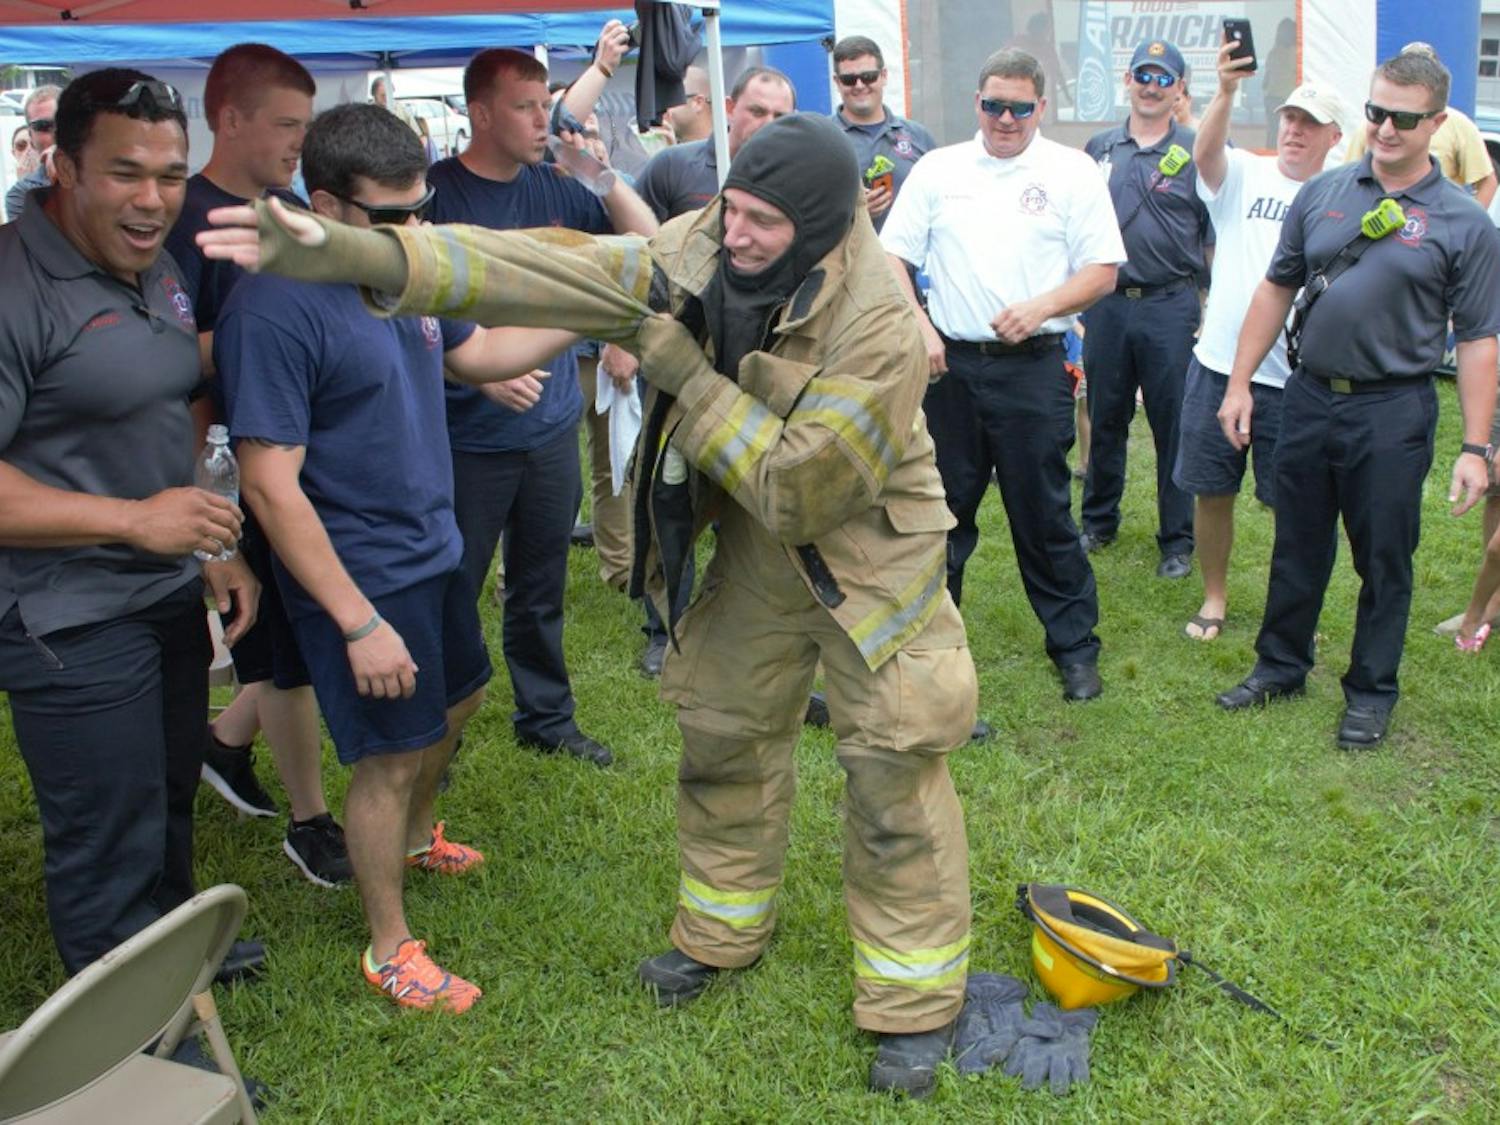 Opelika firefighters cheer on their relay team&nbsp;as they win the Big Bite Battle on Saturday, June 2, 2018 in Opelika, Ala.&nbsp;